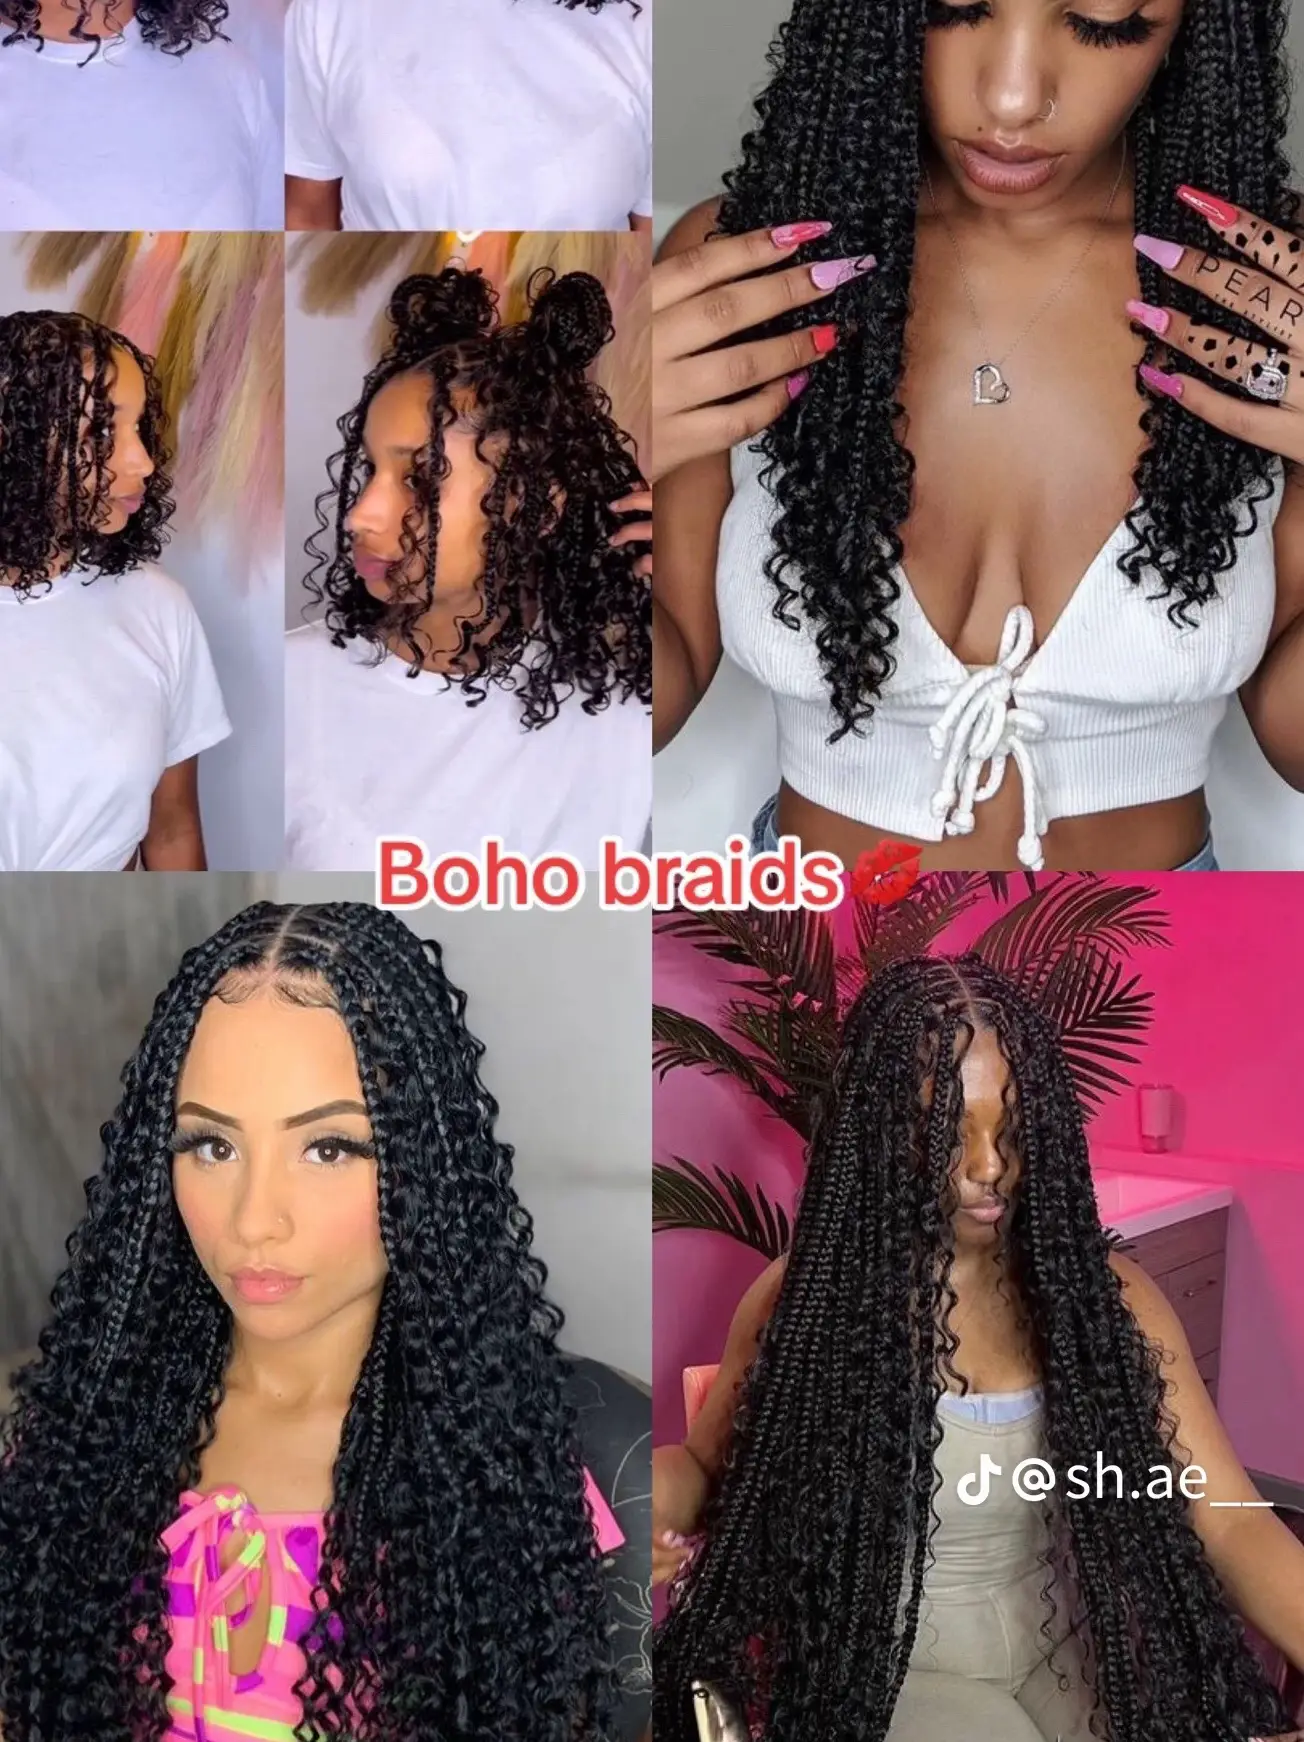 Small boho/ Goddess Knotless braids 💕💇🏽‍♀️😍⬇️⬇️ .TRAVEL DATES FOR  PA/NJ/DE AUGUST 21-27th! ✈️ . Book the